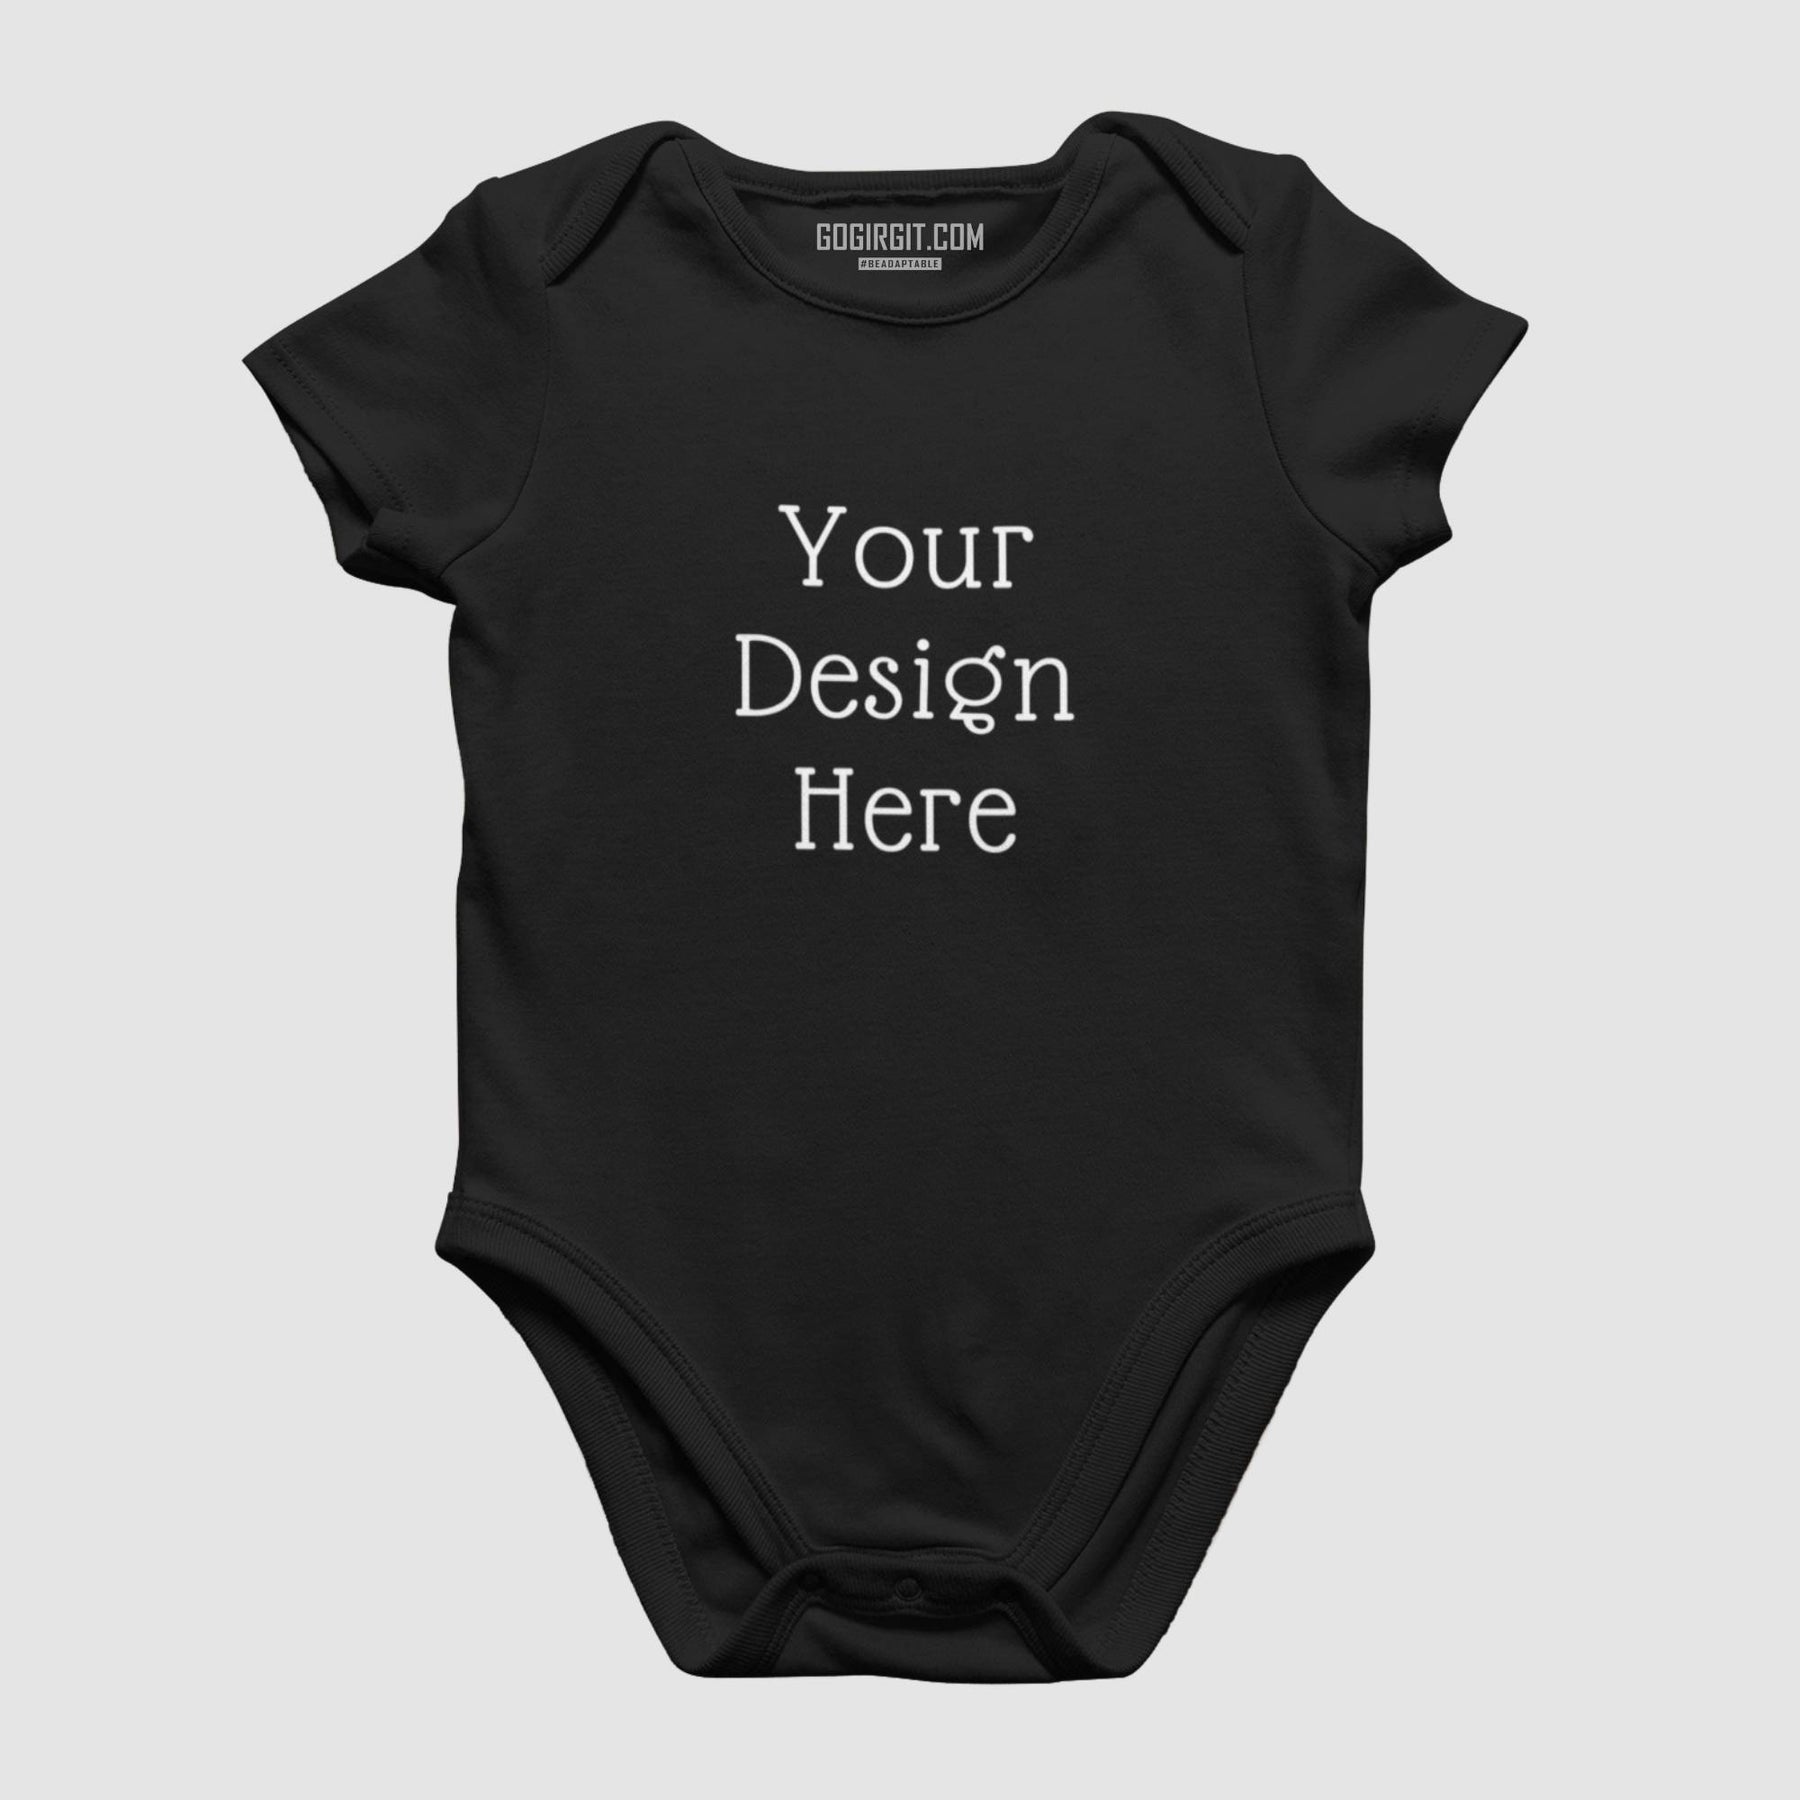 cotton-rompers-for-kids-also-called-onesie-personalised-and-customized-color-black-gogirgit